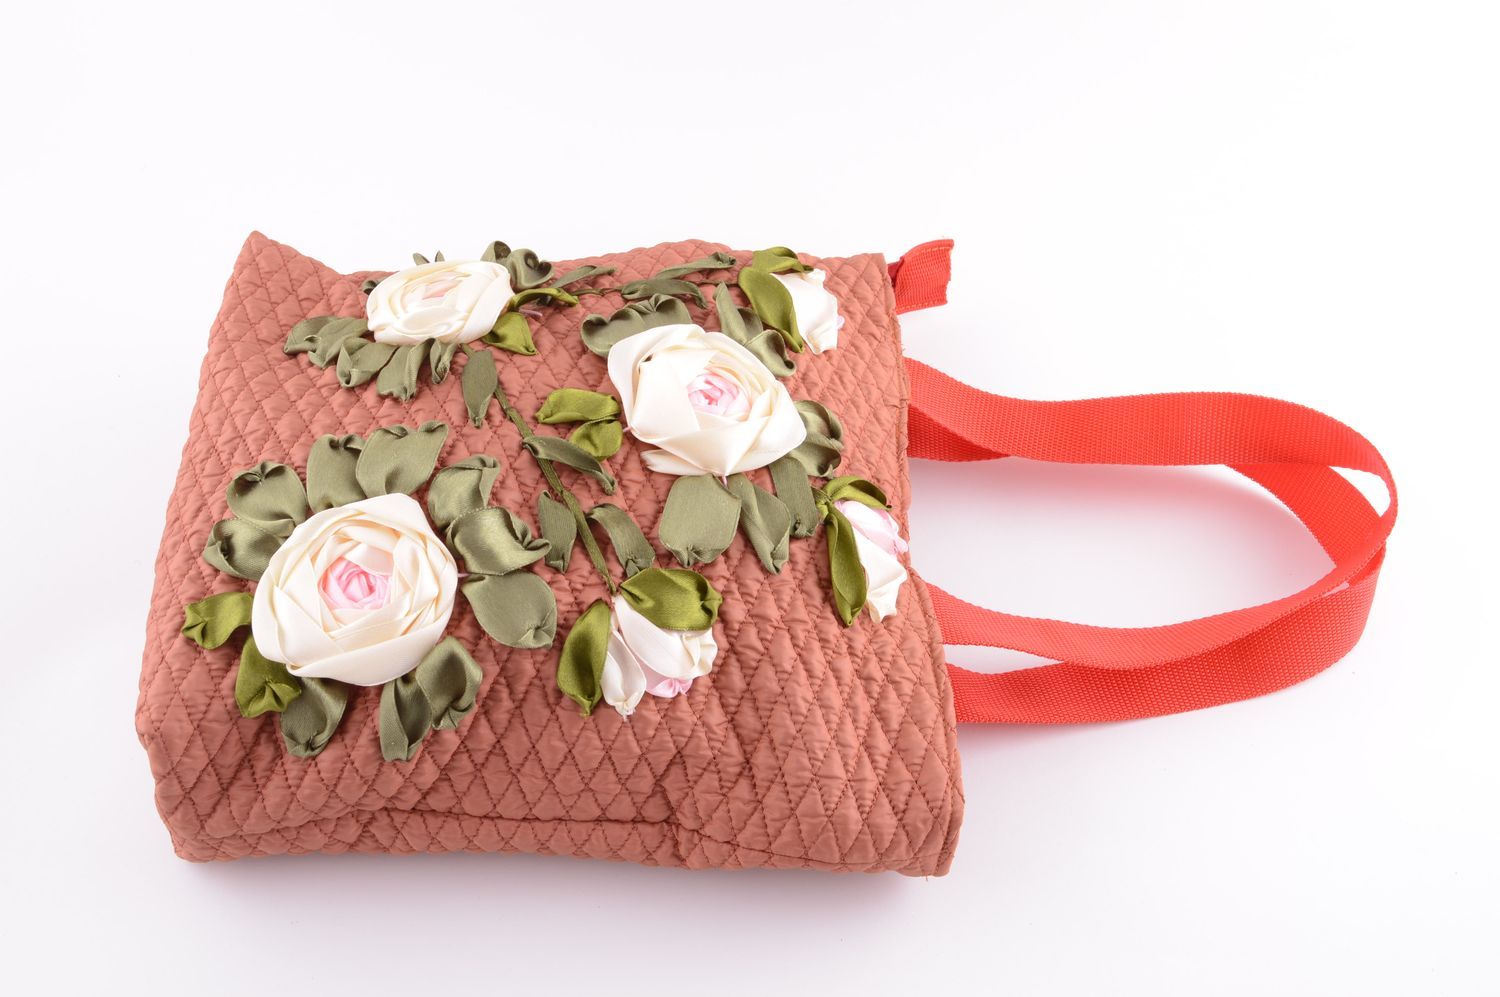 Shoulder bag unusual handmade textile ladys bag with embroidered flowers photo 2